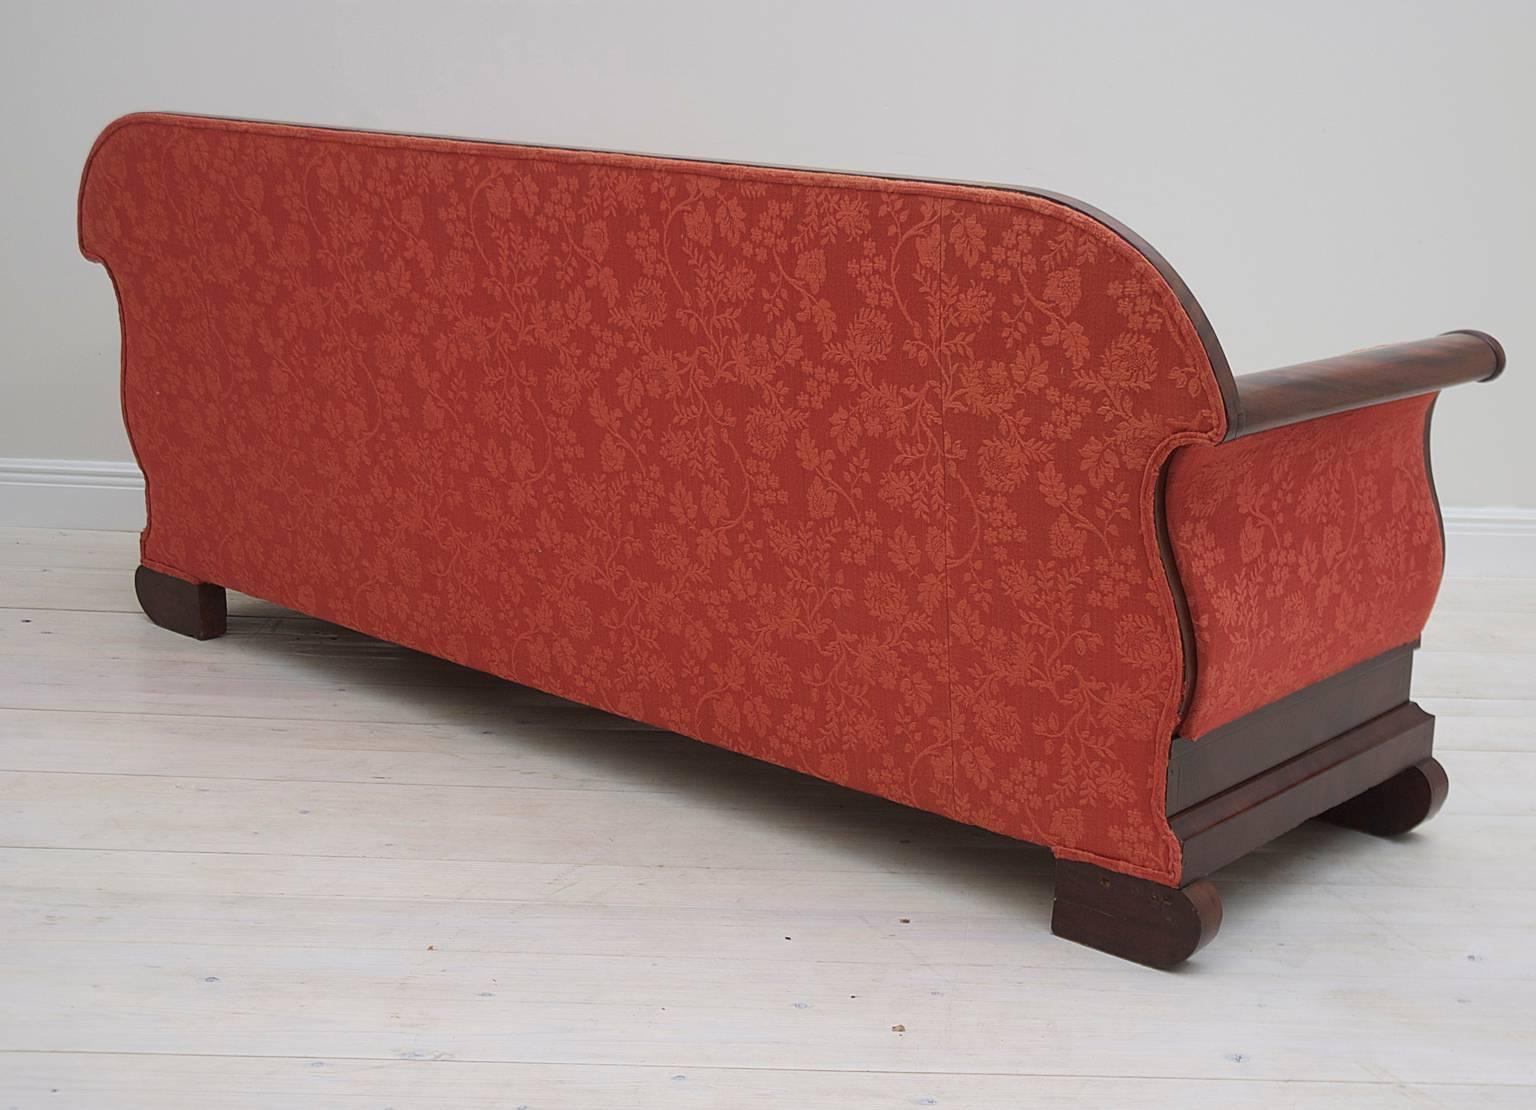 Polished American Empire Sleigh Sofa in Mahogany Attributable to Meeks, circa 1835 For Sale